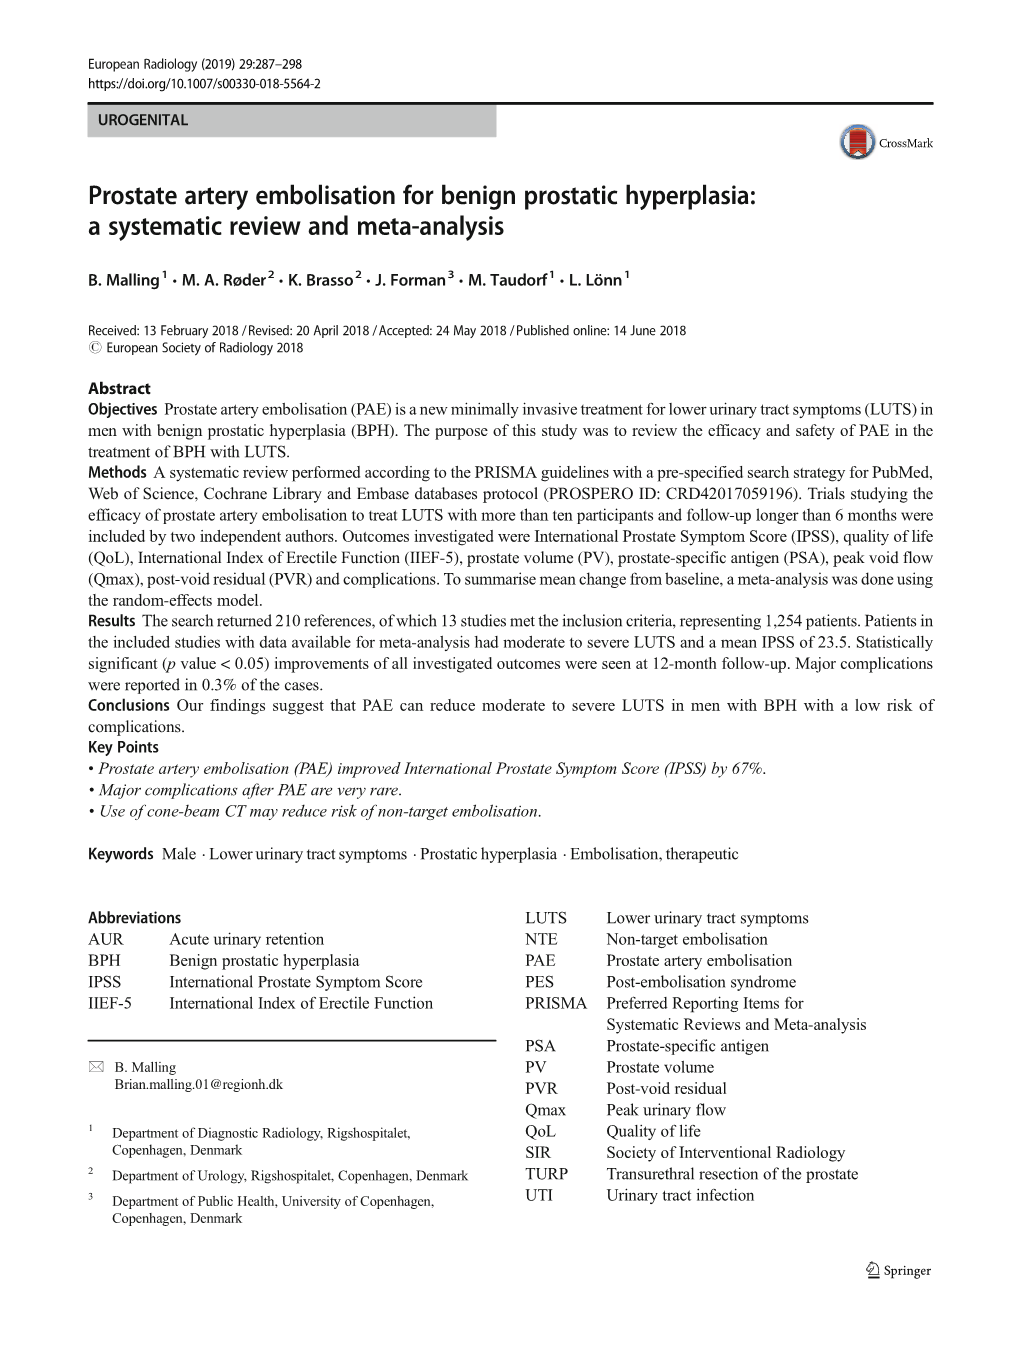 Prostate Artery Embolisation for Benign Prostatic Hyperplasia: a Systematic Review and Meta-Analysis